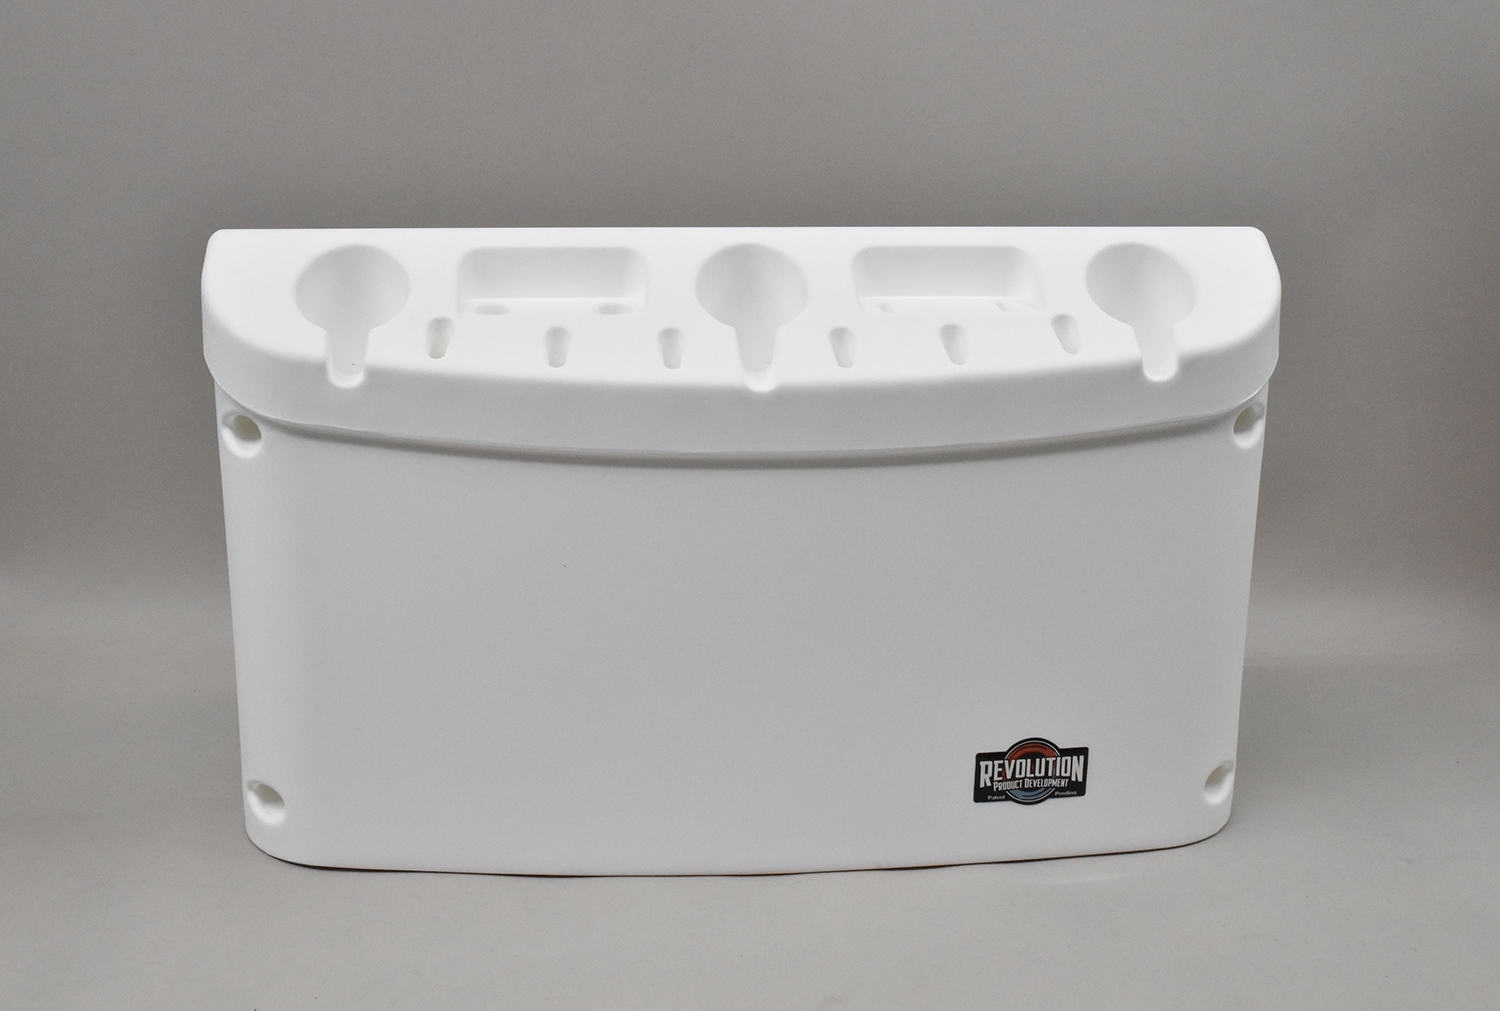 https://southchathamtackle.com/store/sc_images/option_choices/RPD%20Pro%20Series%20Rod%20Holder%20White.jpg